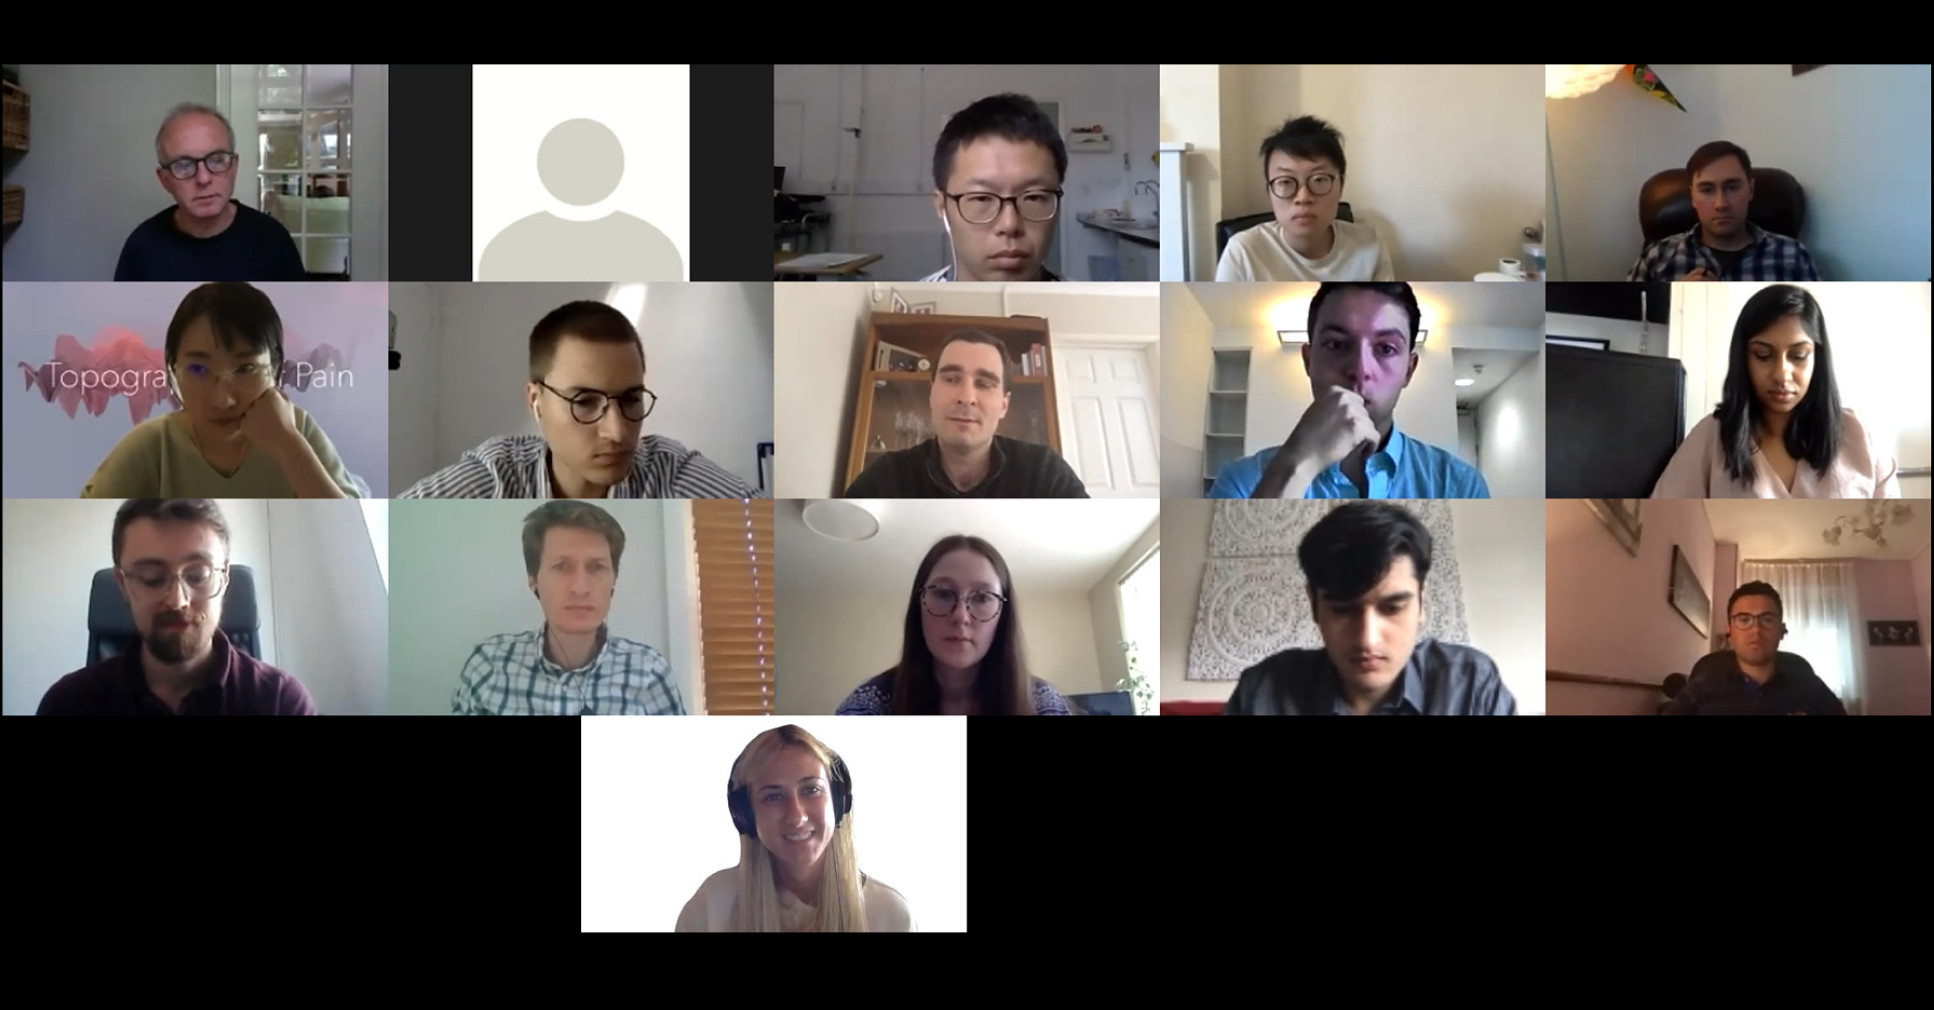 The MedTech SuperConnector Cohort in 2020 having their first session via Zoom